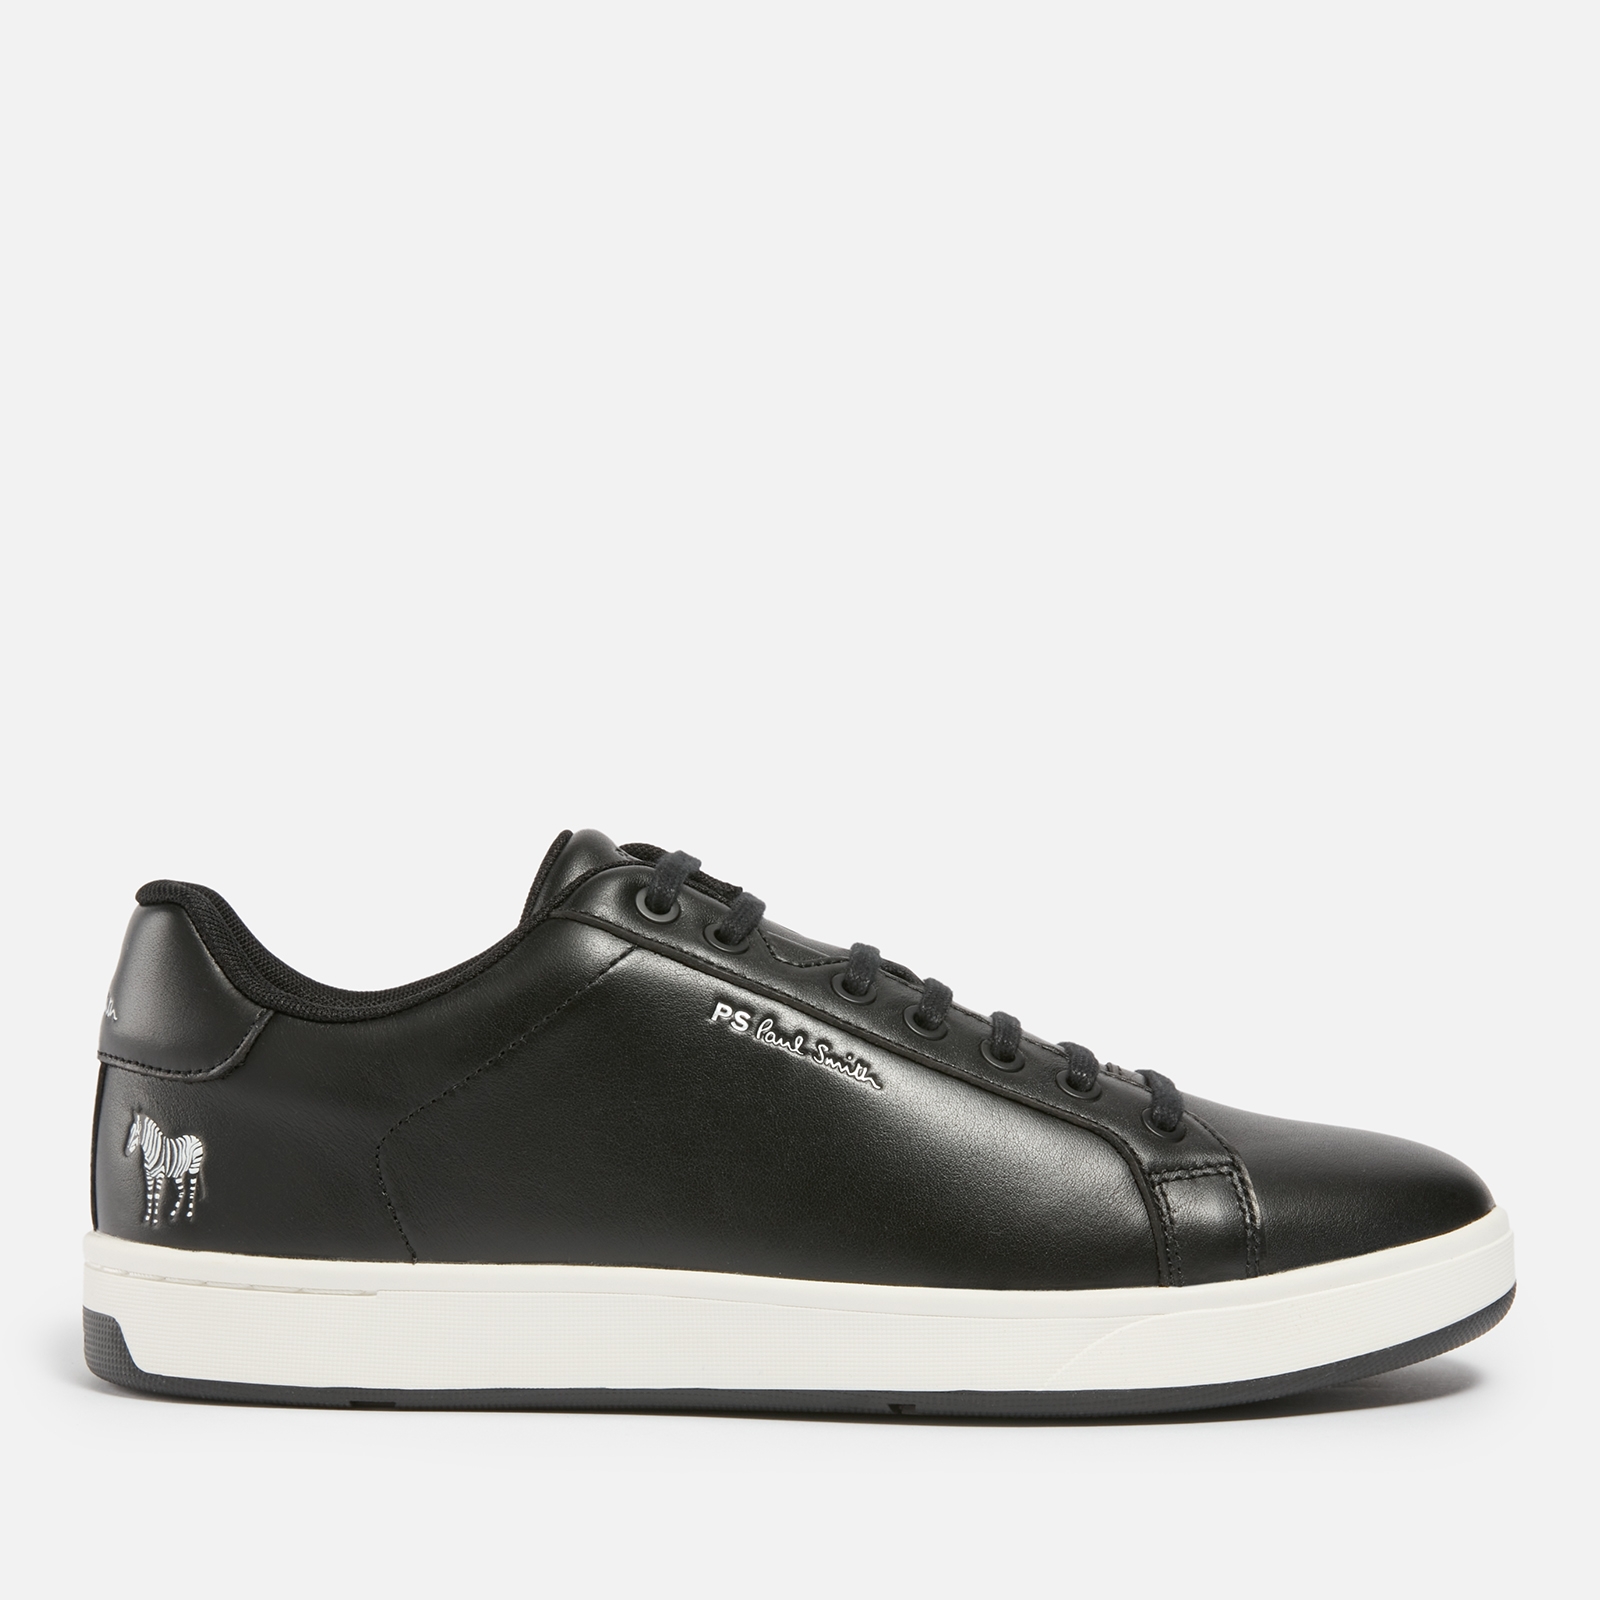 PS Paul Smith Men’s Albany Leather Trainers